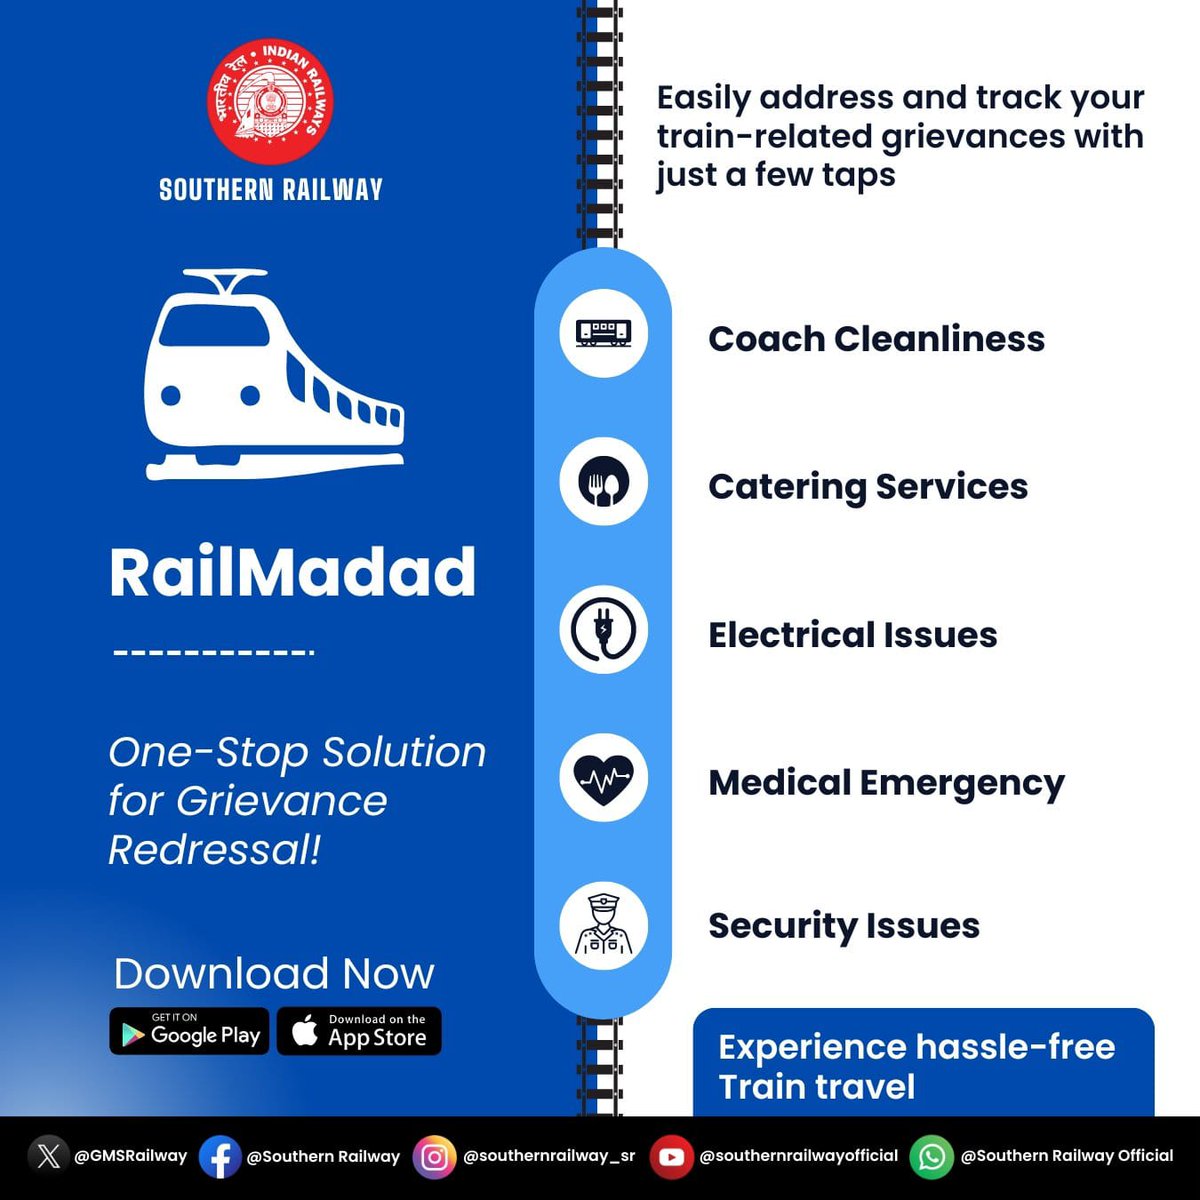 Streamline complaint management with RailMadad!

Efficiently submit and track your grievances with minimal effort, ensuring prompt and efficient resolution.

#RailMadad #ComplaintHandling #Efficiency #Resolution #SouthernRailway